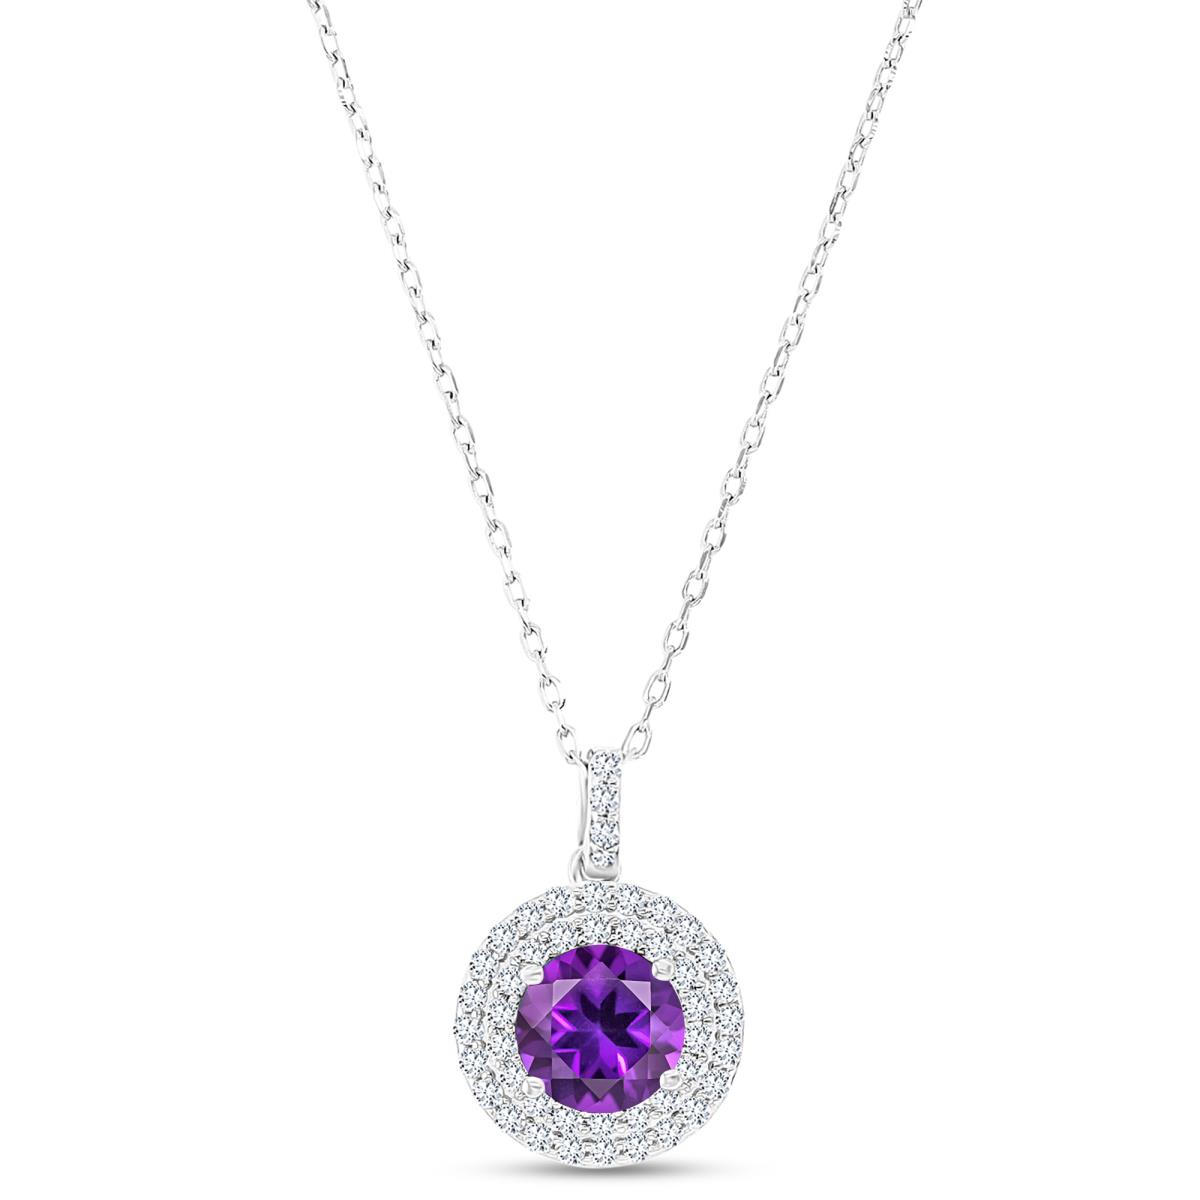 Sterling Silver Rhodium 7mm RD Amethyst / Cr White Sapphire Duble Halo 16"+2" Necklace